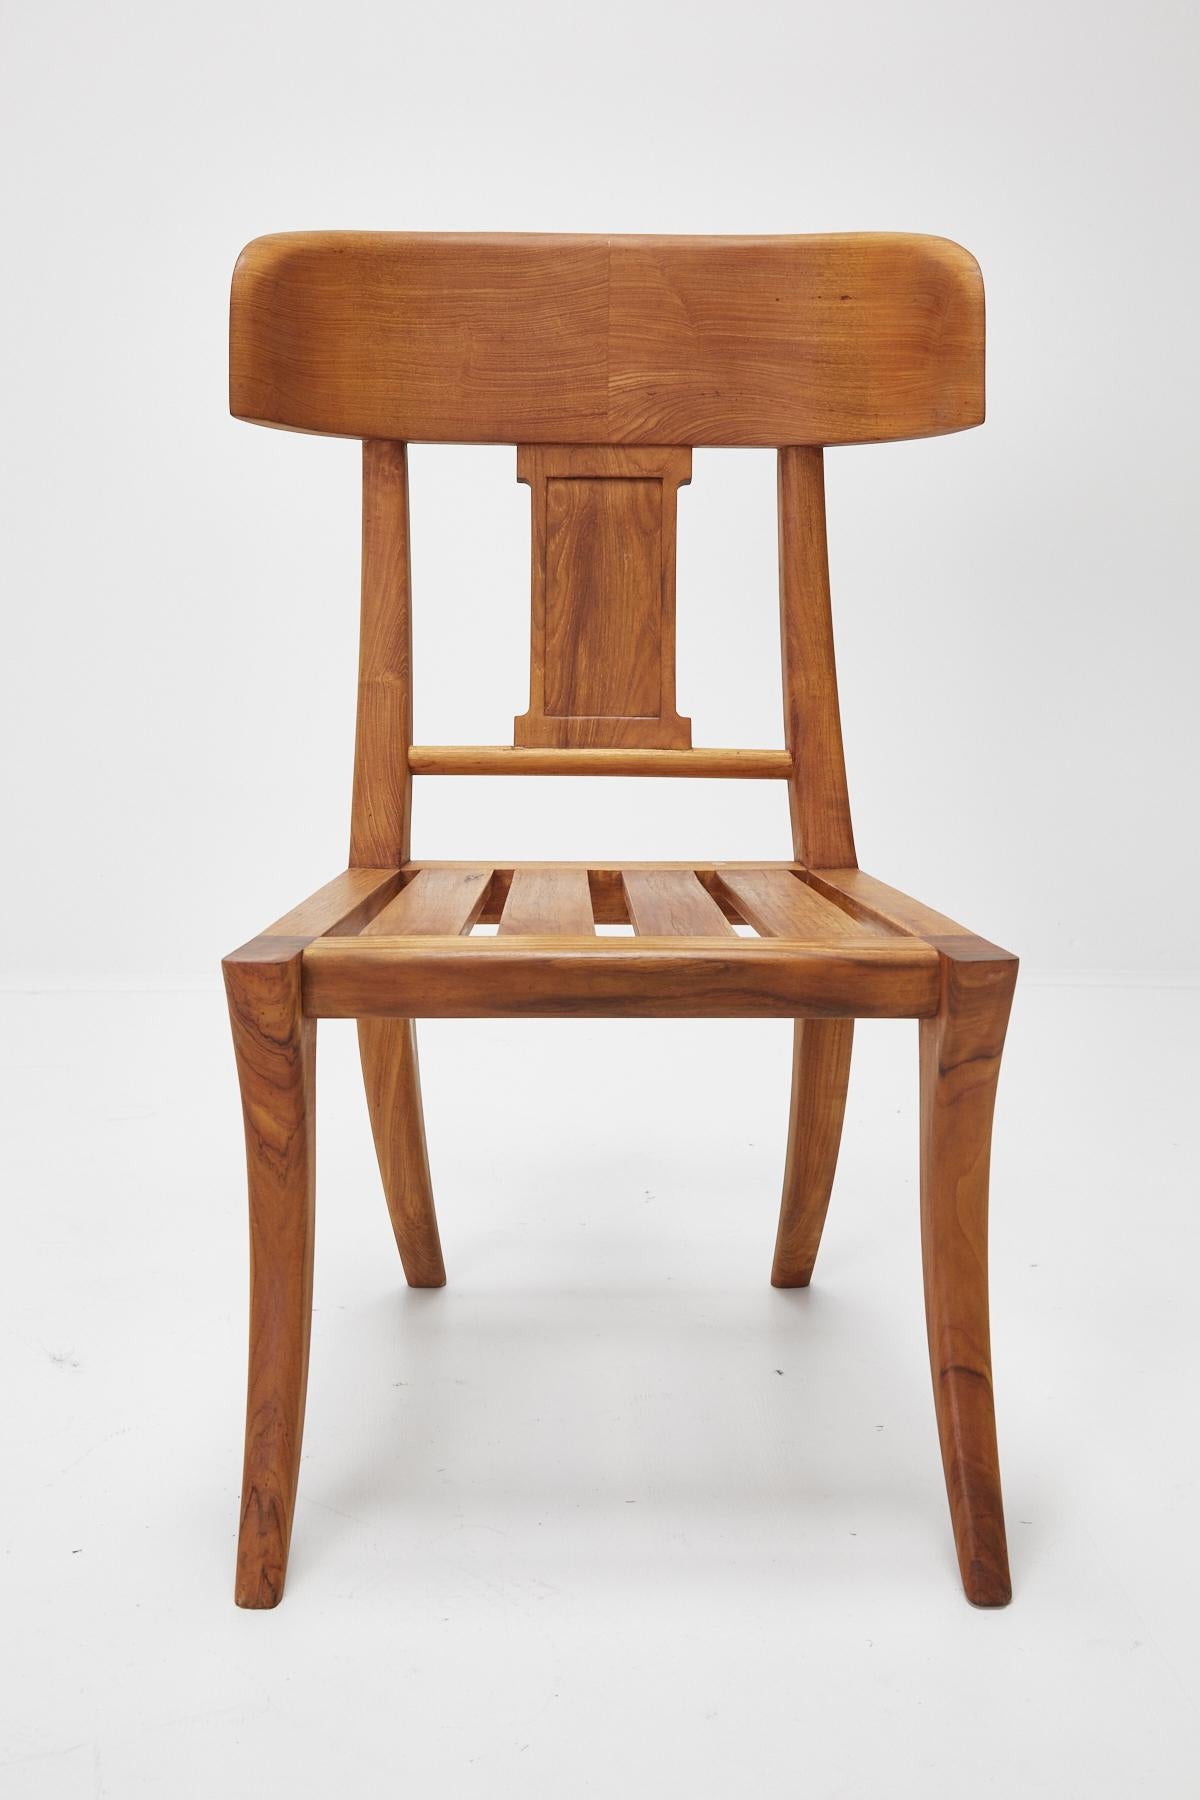 Beautiful solid teak side chair or dining chair with classical Klismos styling. Can be used inside or outside.